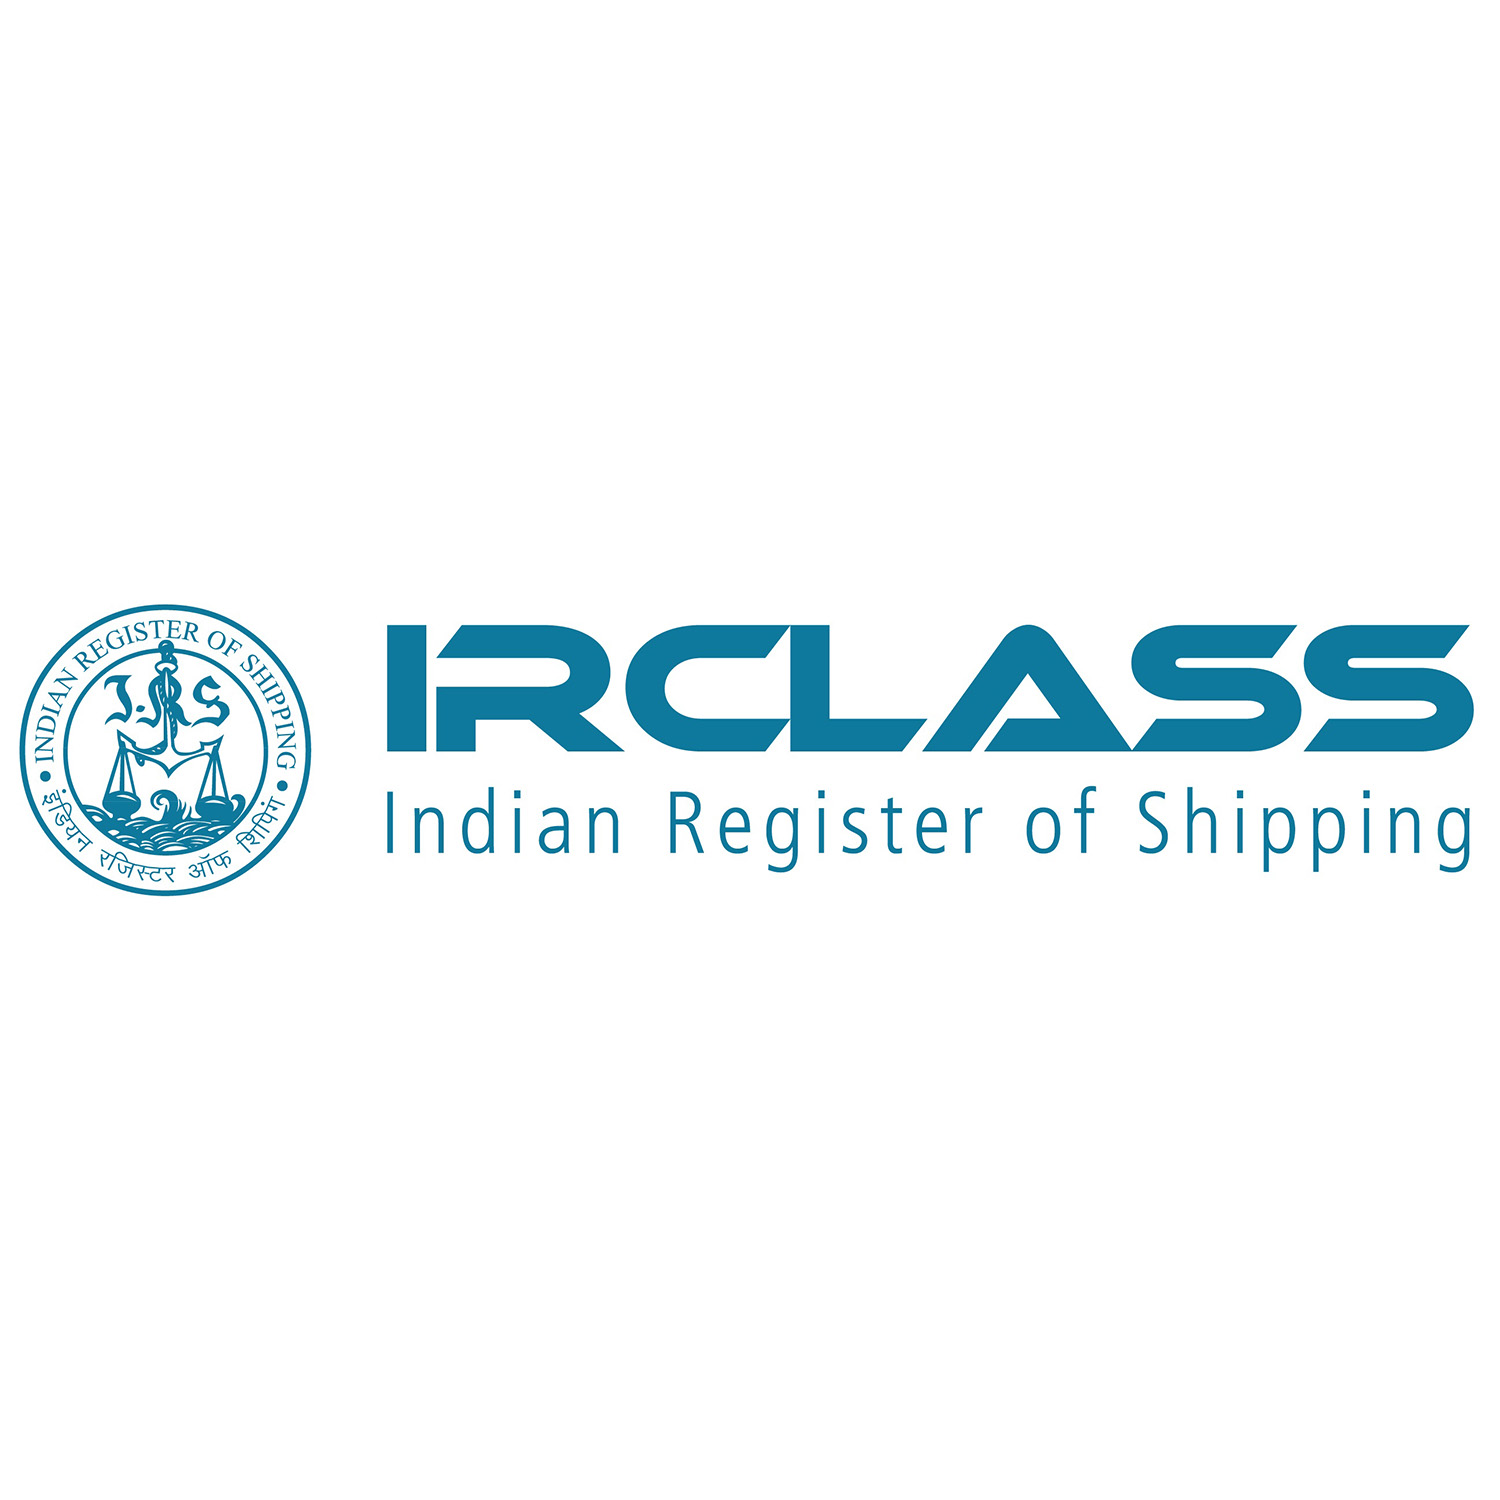 Indian Register of Shipping (IRClass).